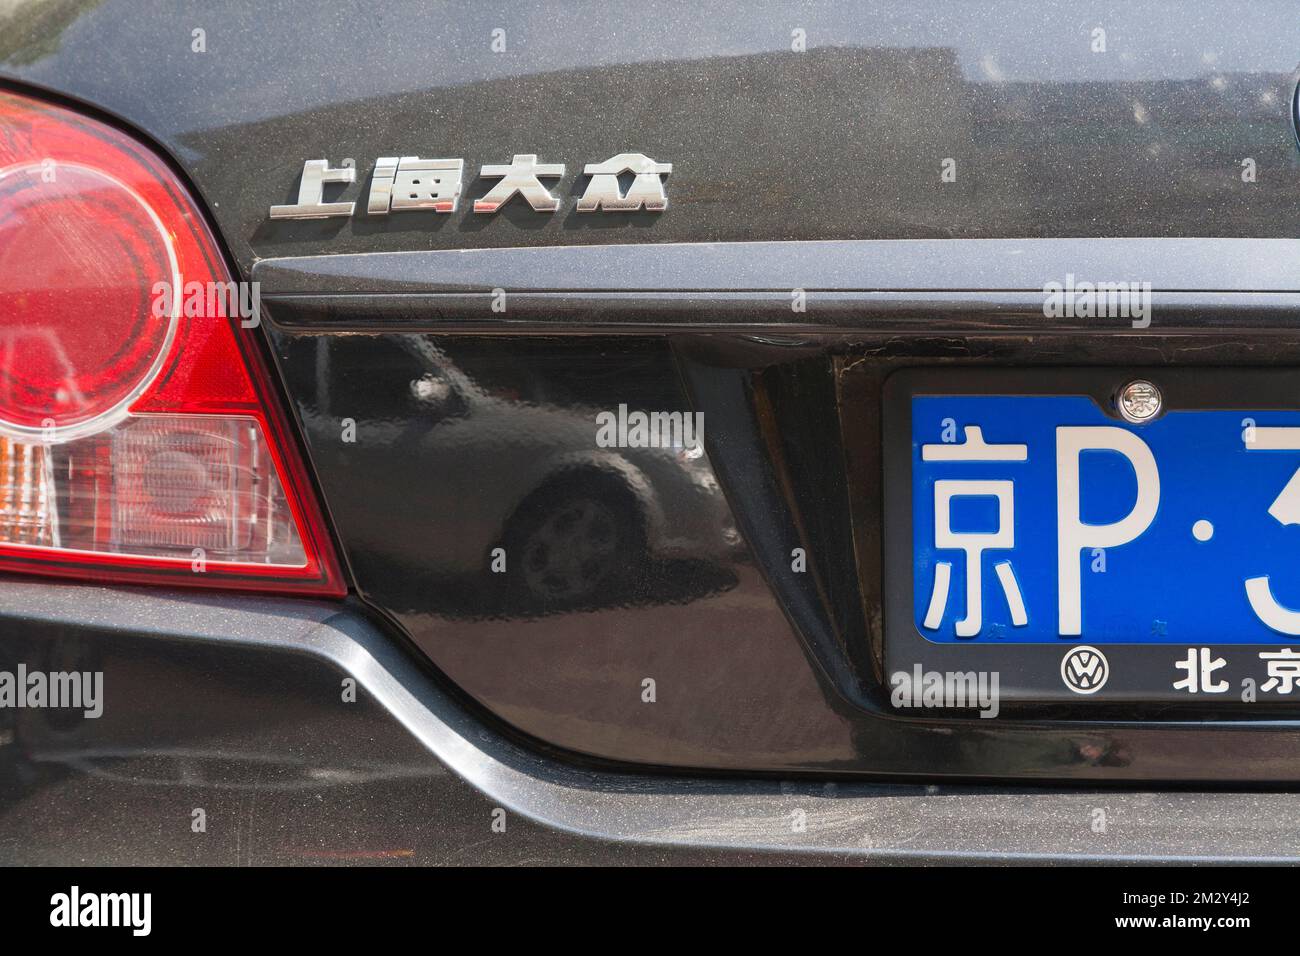 Rear with numberplate and model written in Chinese characters / writing VW Volkswagen car / vehicle in China.  Xian, China. (125) Stock Photo